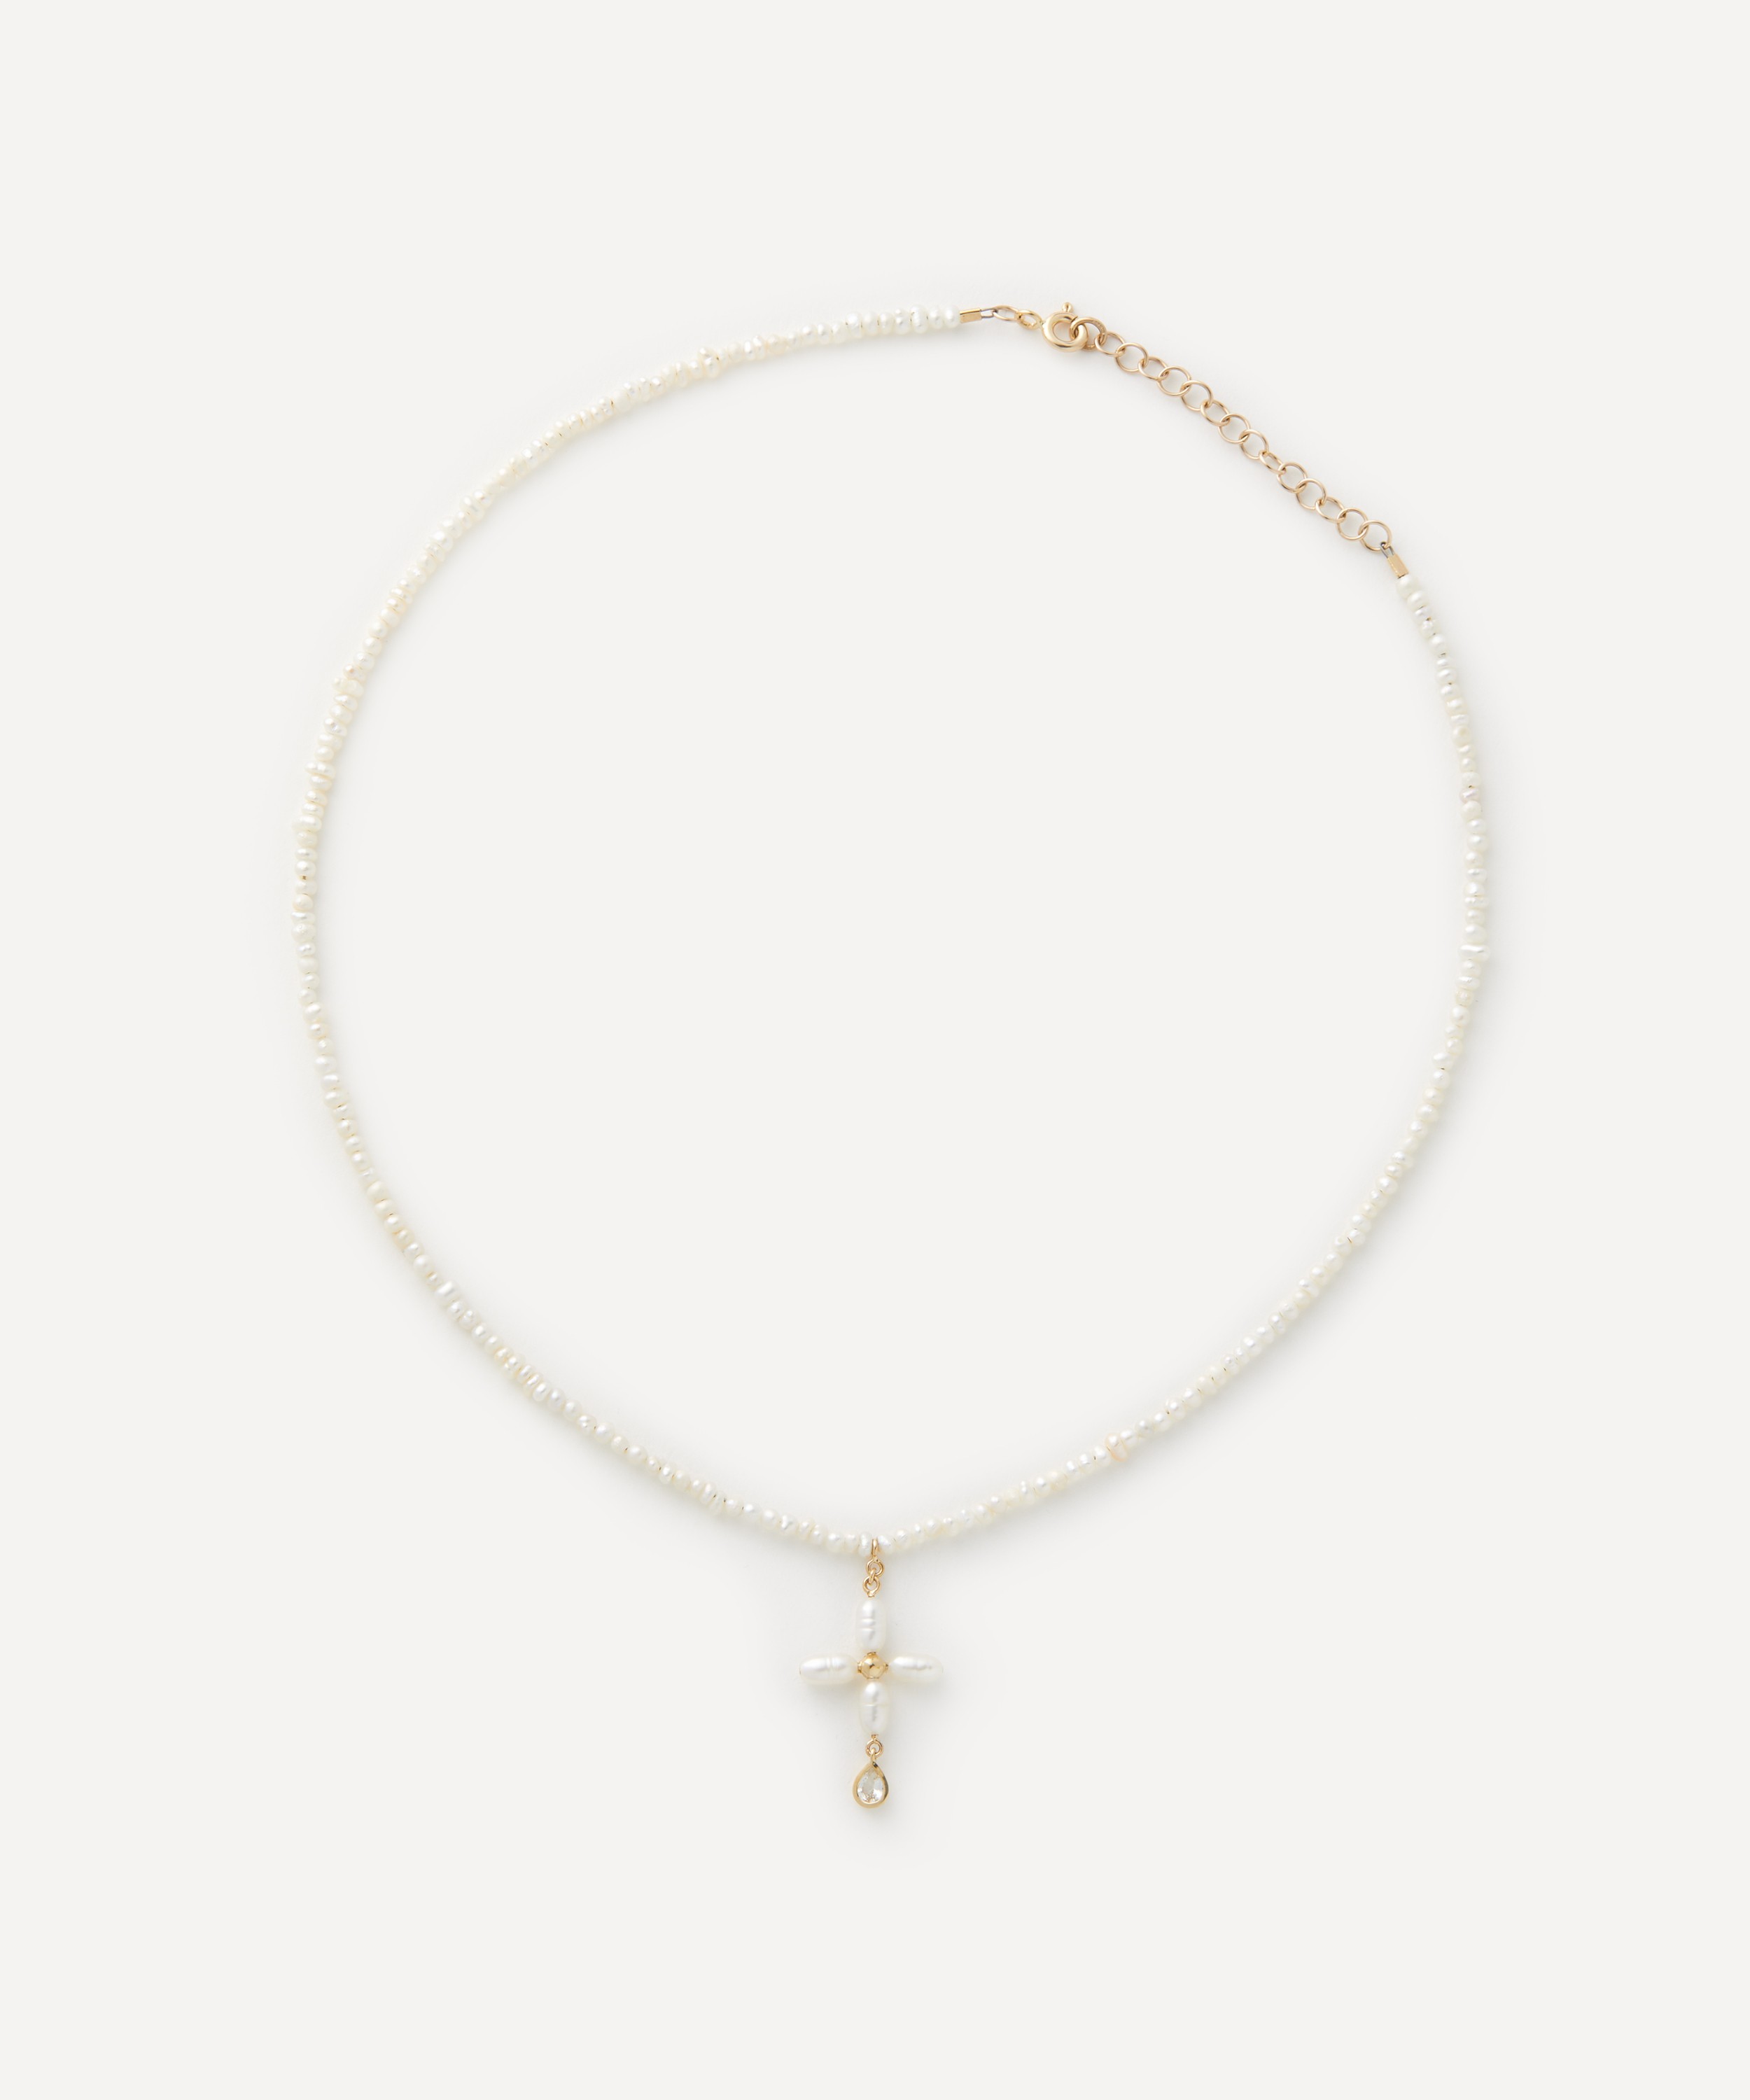 Pascale Monvoisin - 9ct Gold Palerme N°2 Pearl Choker Necklace